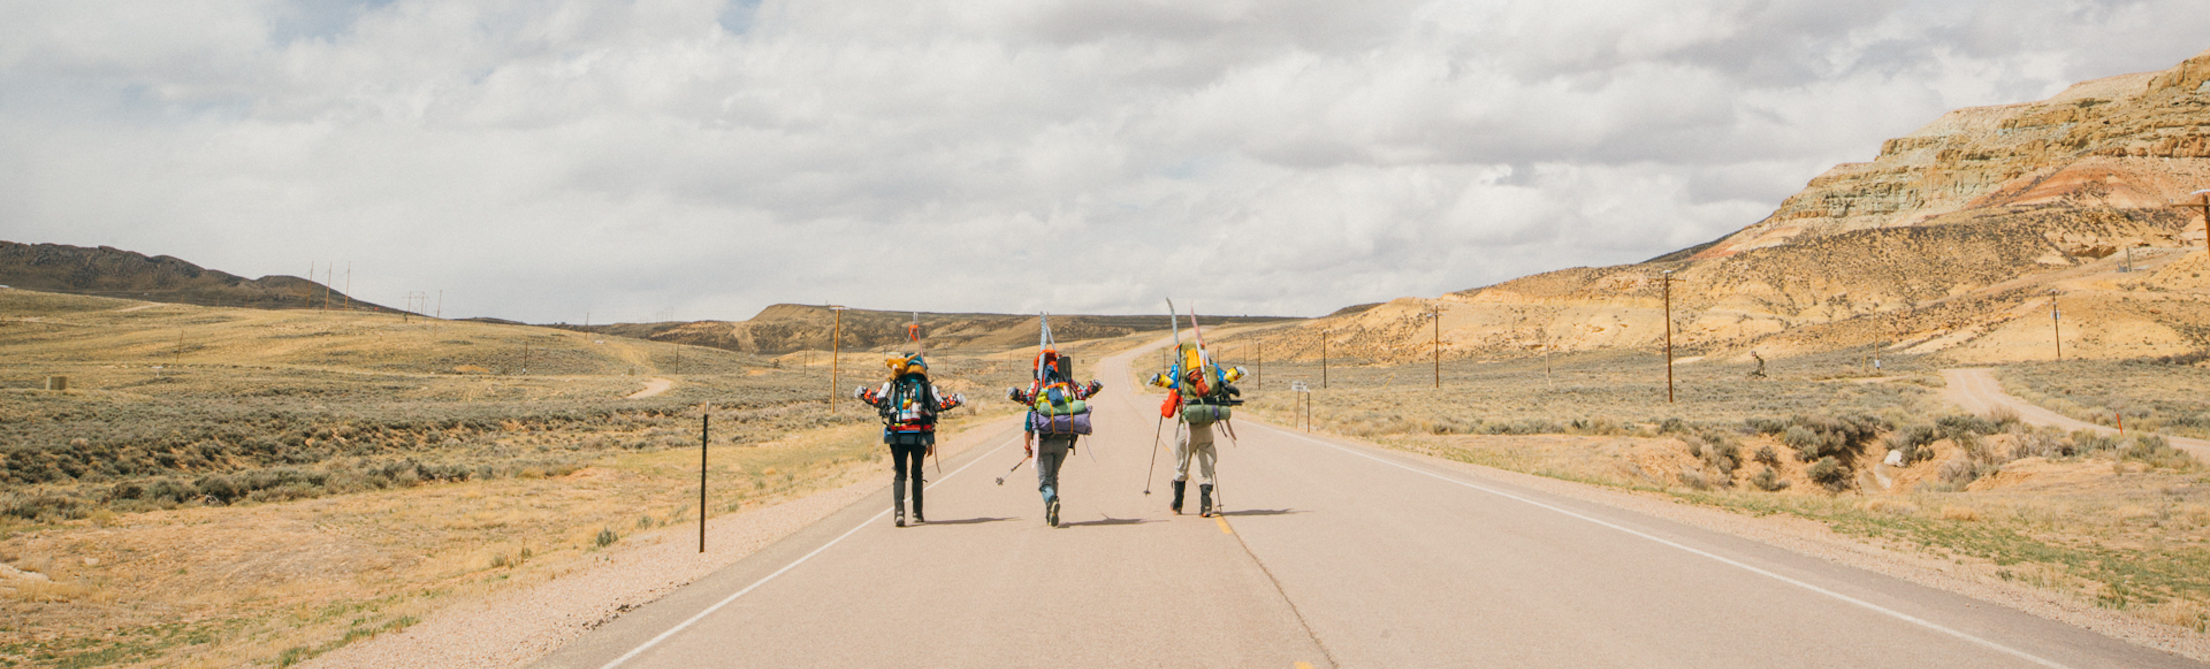 Three women with backpacks hike on a highway